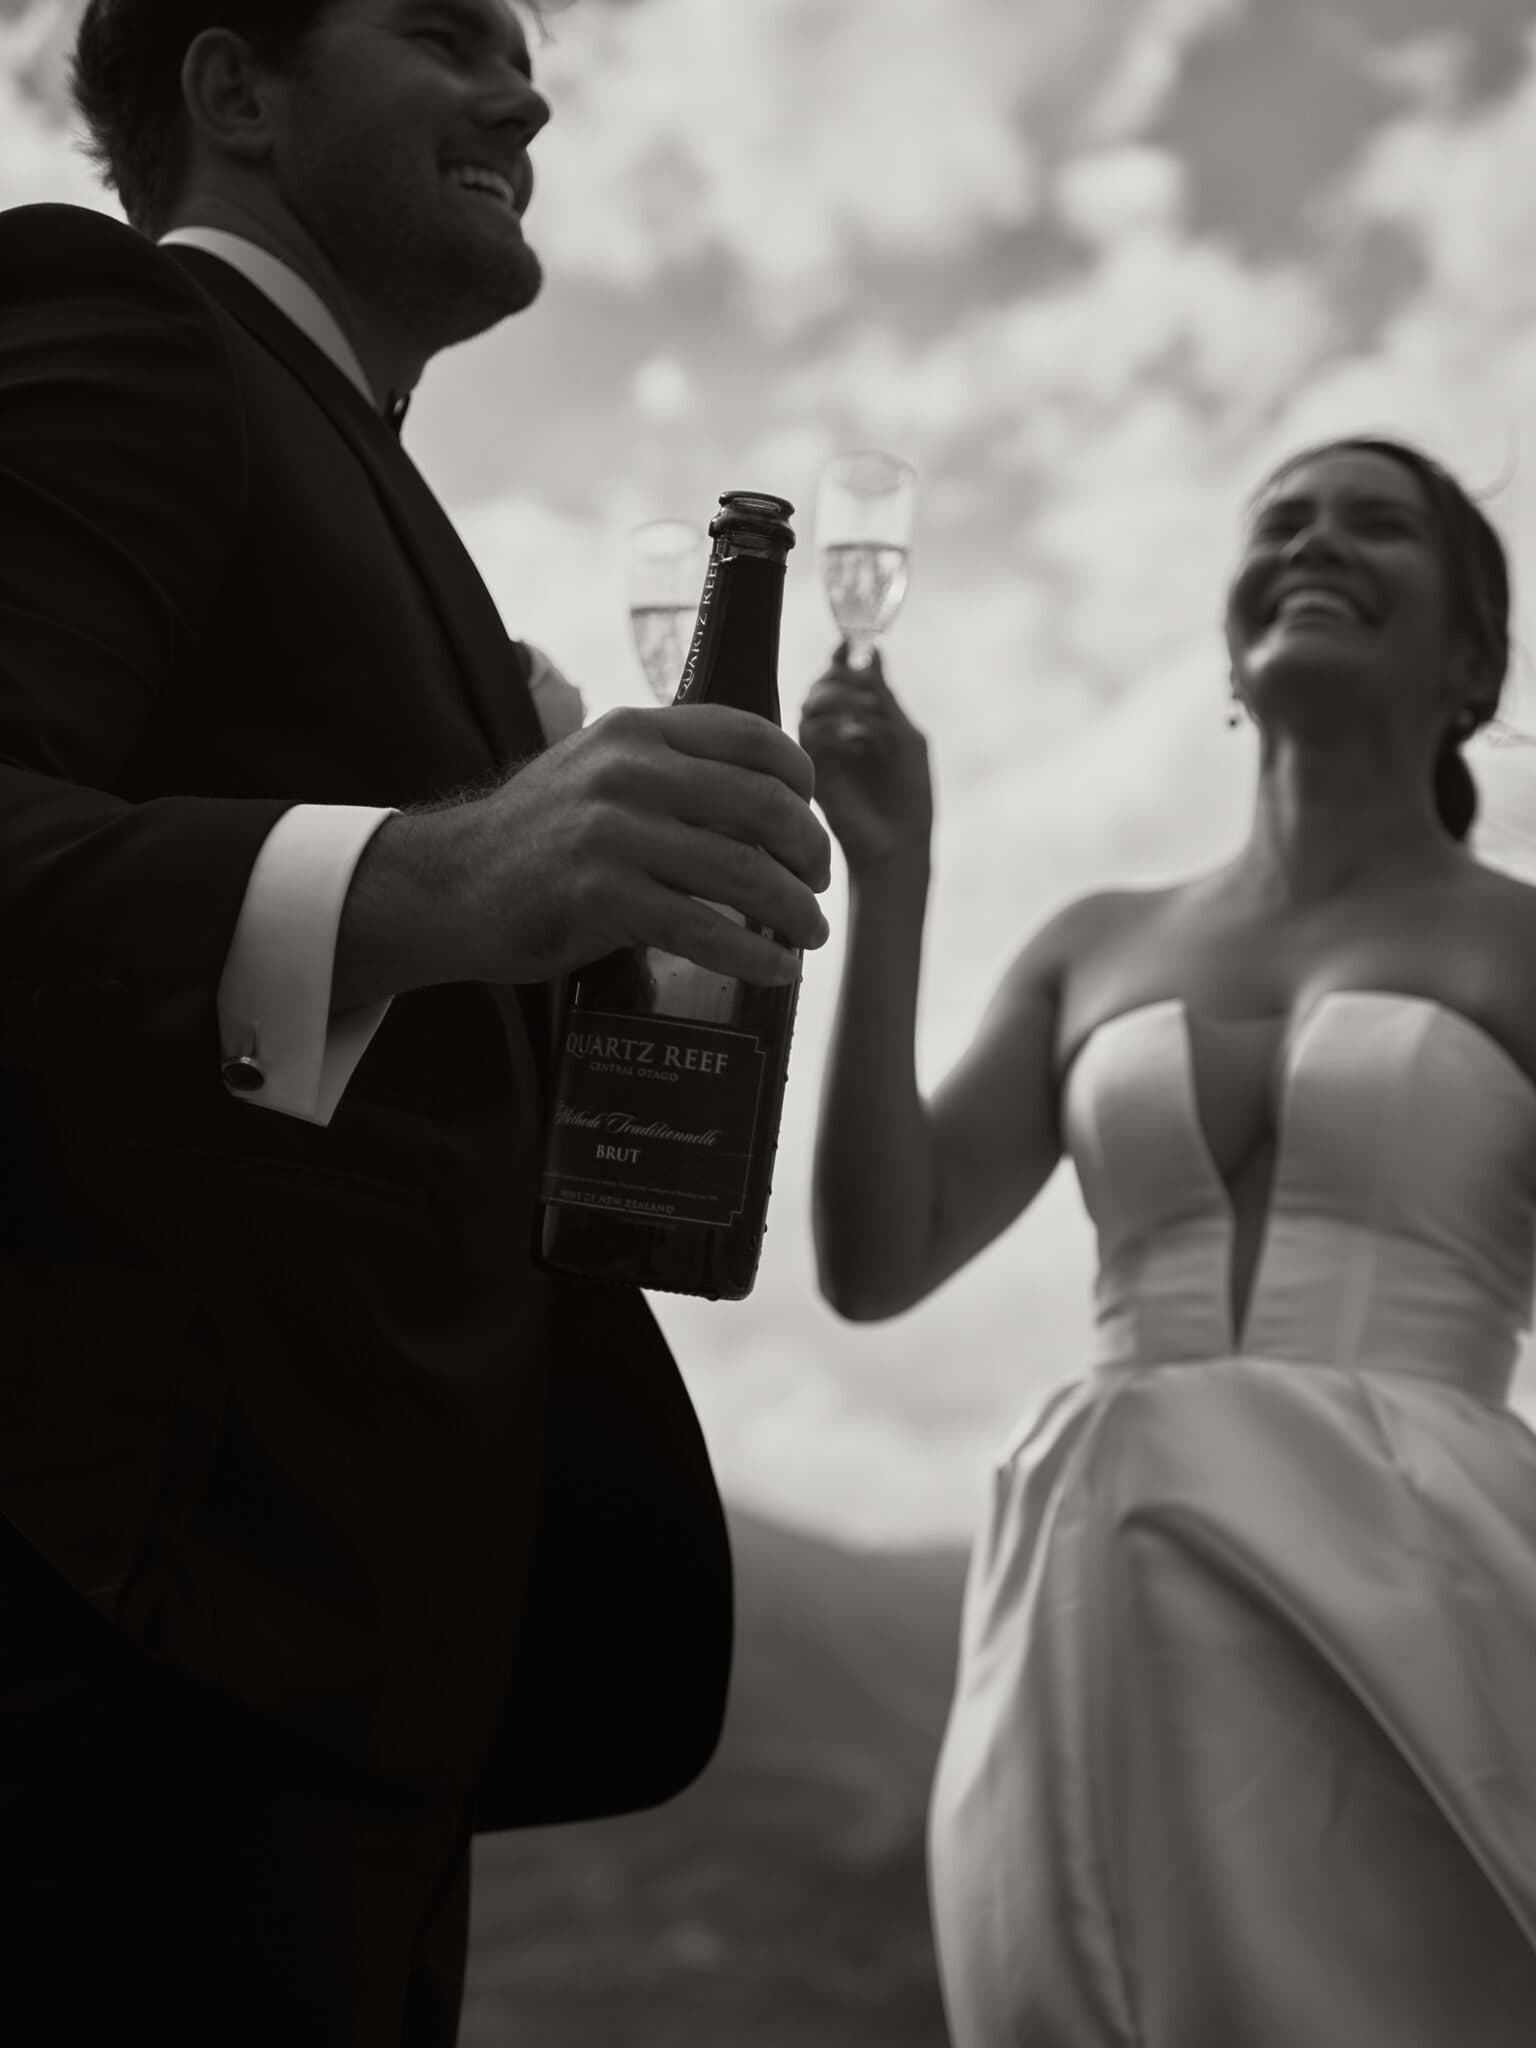 Queenstown Wedding Photographer Contact: A bride and groom toasting with a bottle of wine in this beautiful wedding picture.